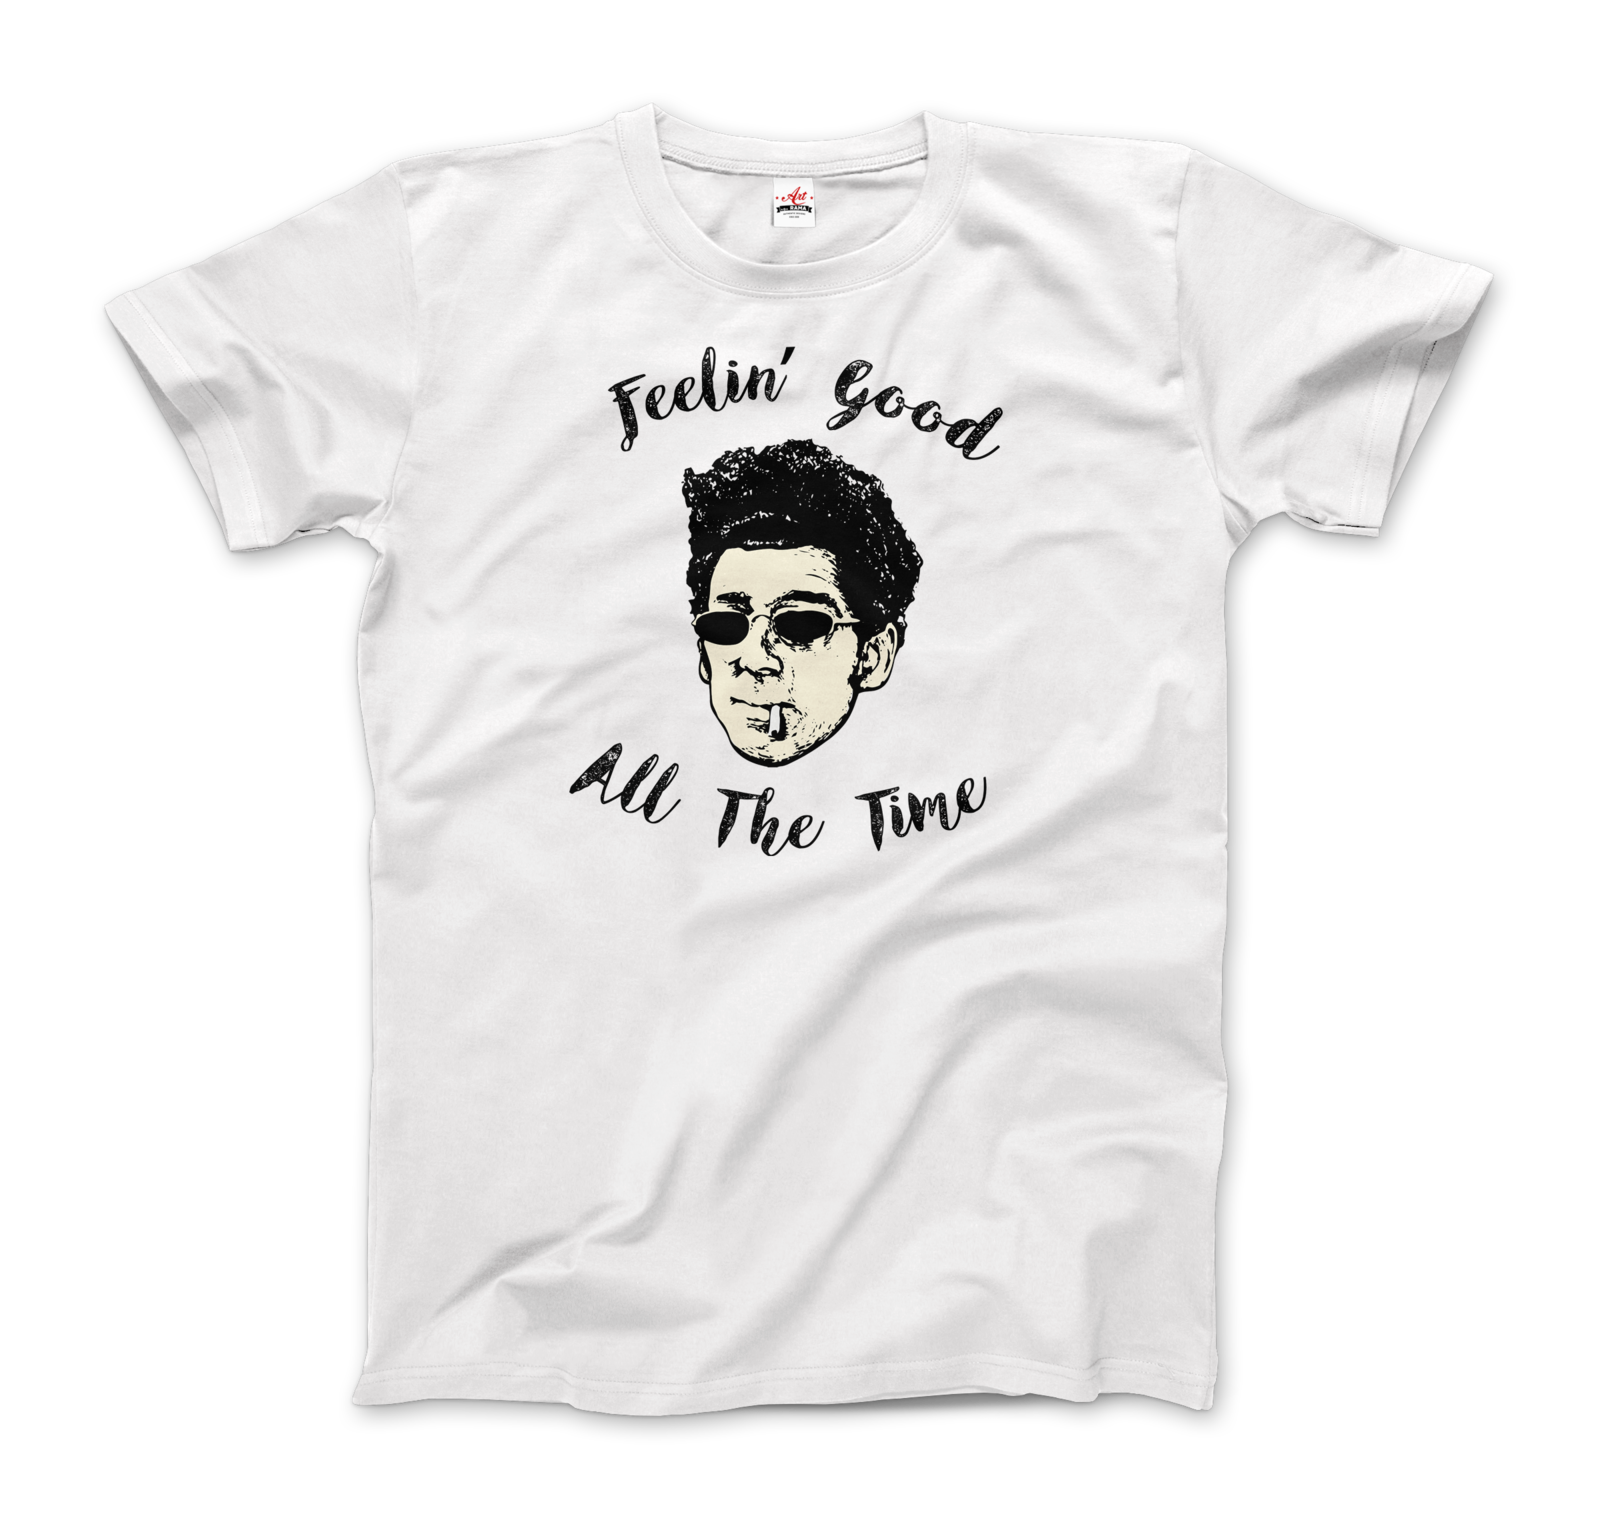 Primary image for Cosmo Kramer, Feeling Good All The Time, Seinfeld T-Shirt